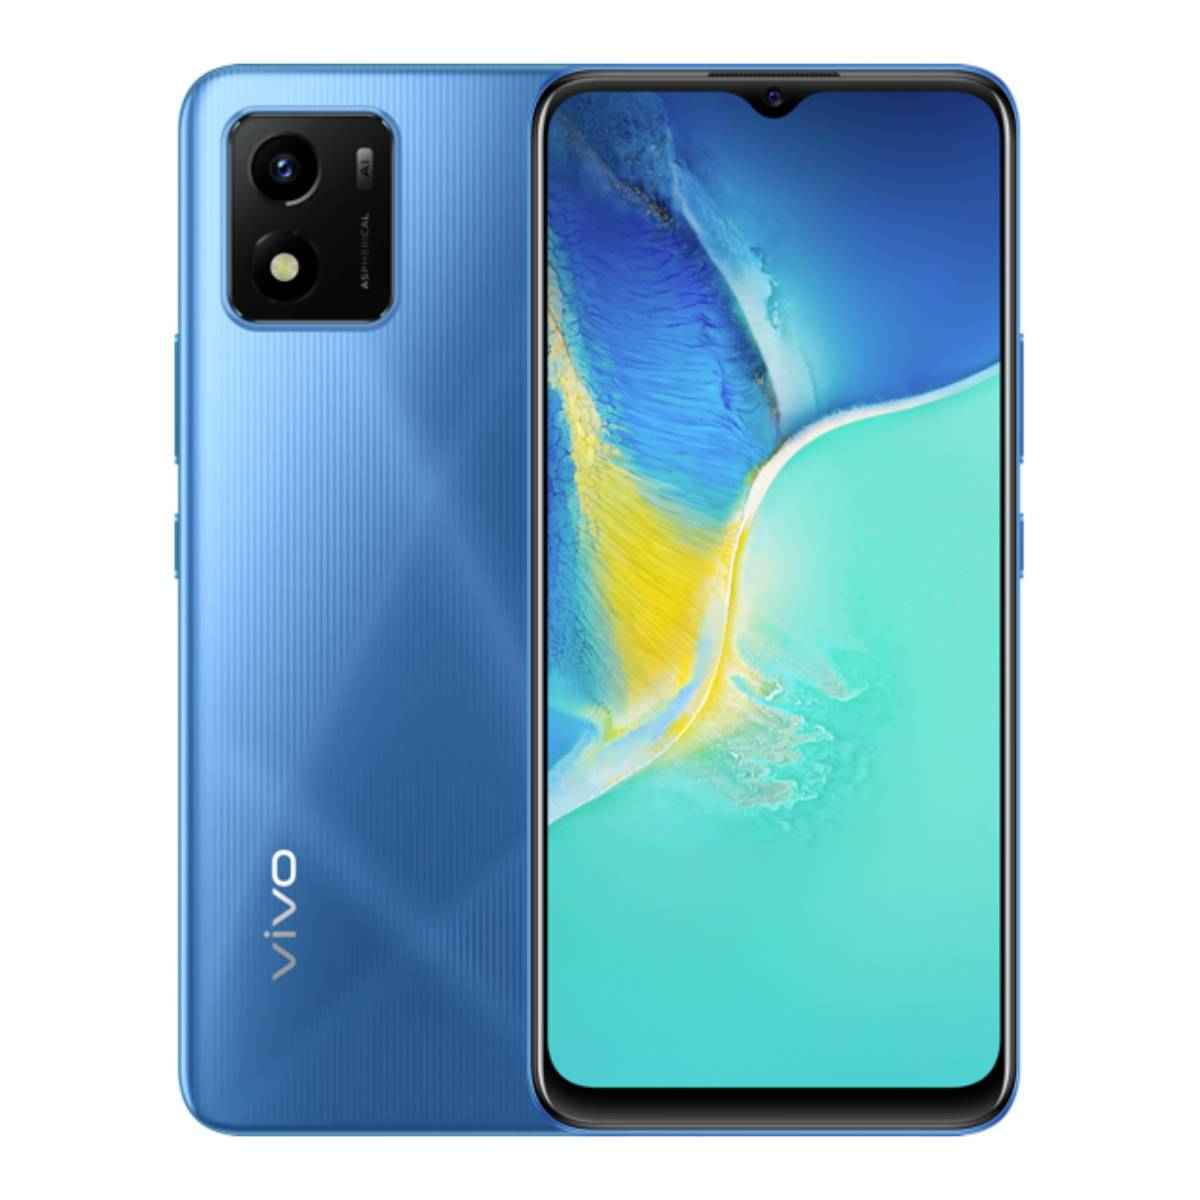 Vivo Y01 Price in India, Full Specifications & Features - 17th May 2022 |  Digit